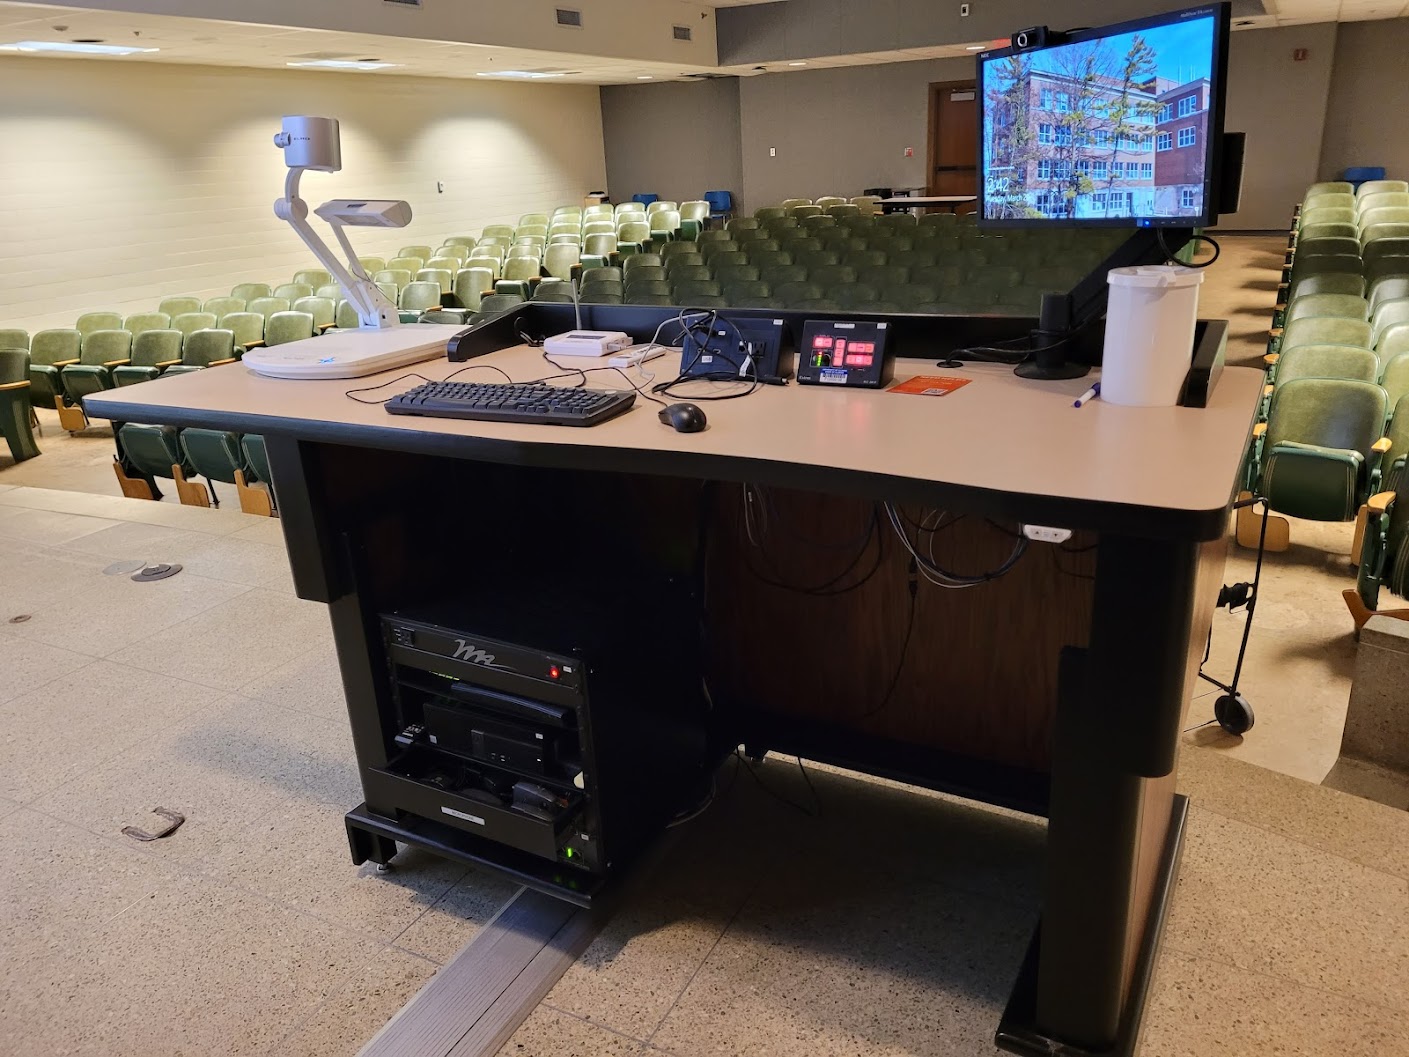 A view of the lectern with computer monitor, HDMI input, Mersive wireless, Blu-ray plater, PC, push button controller, document camera, and audio visual rack.